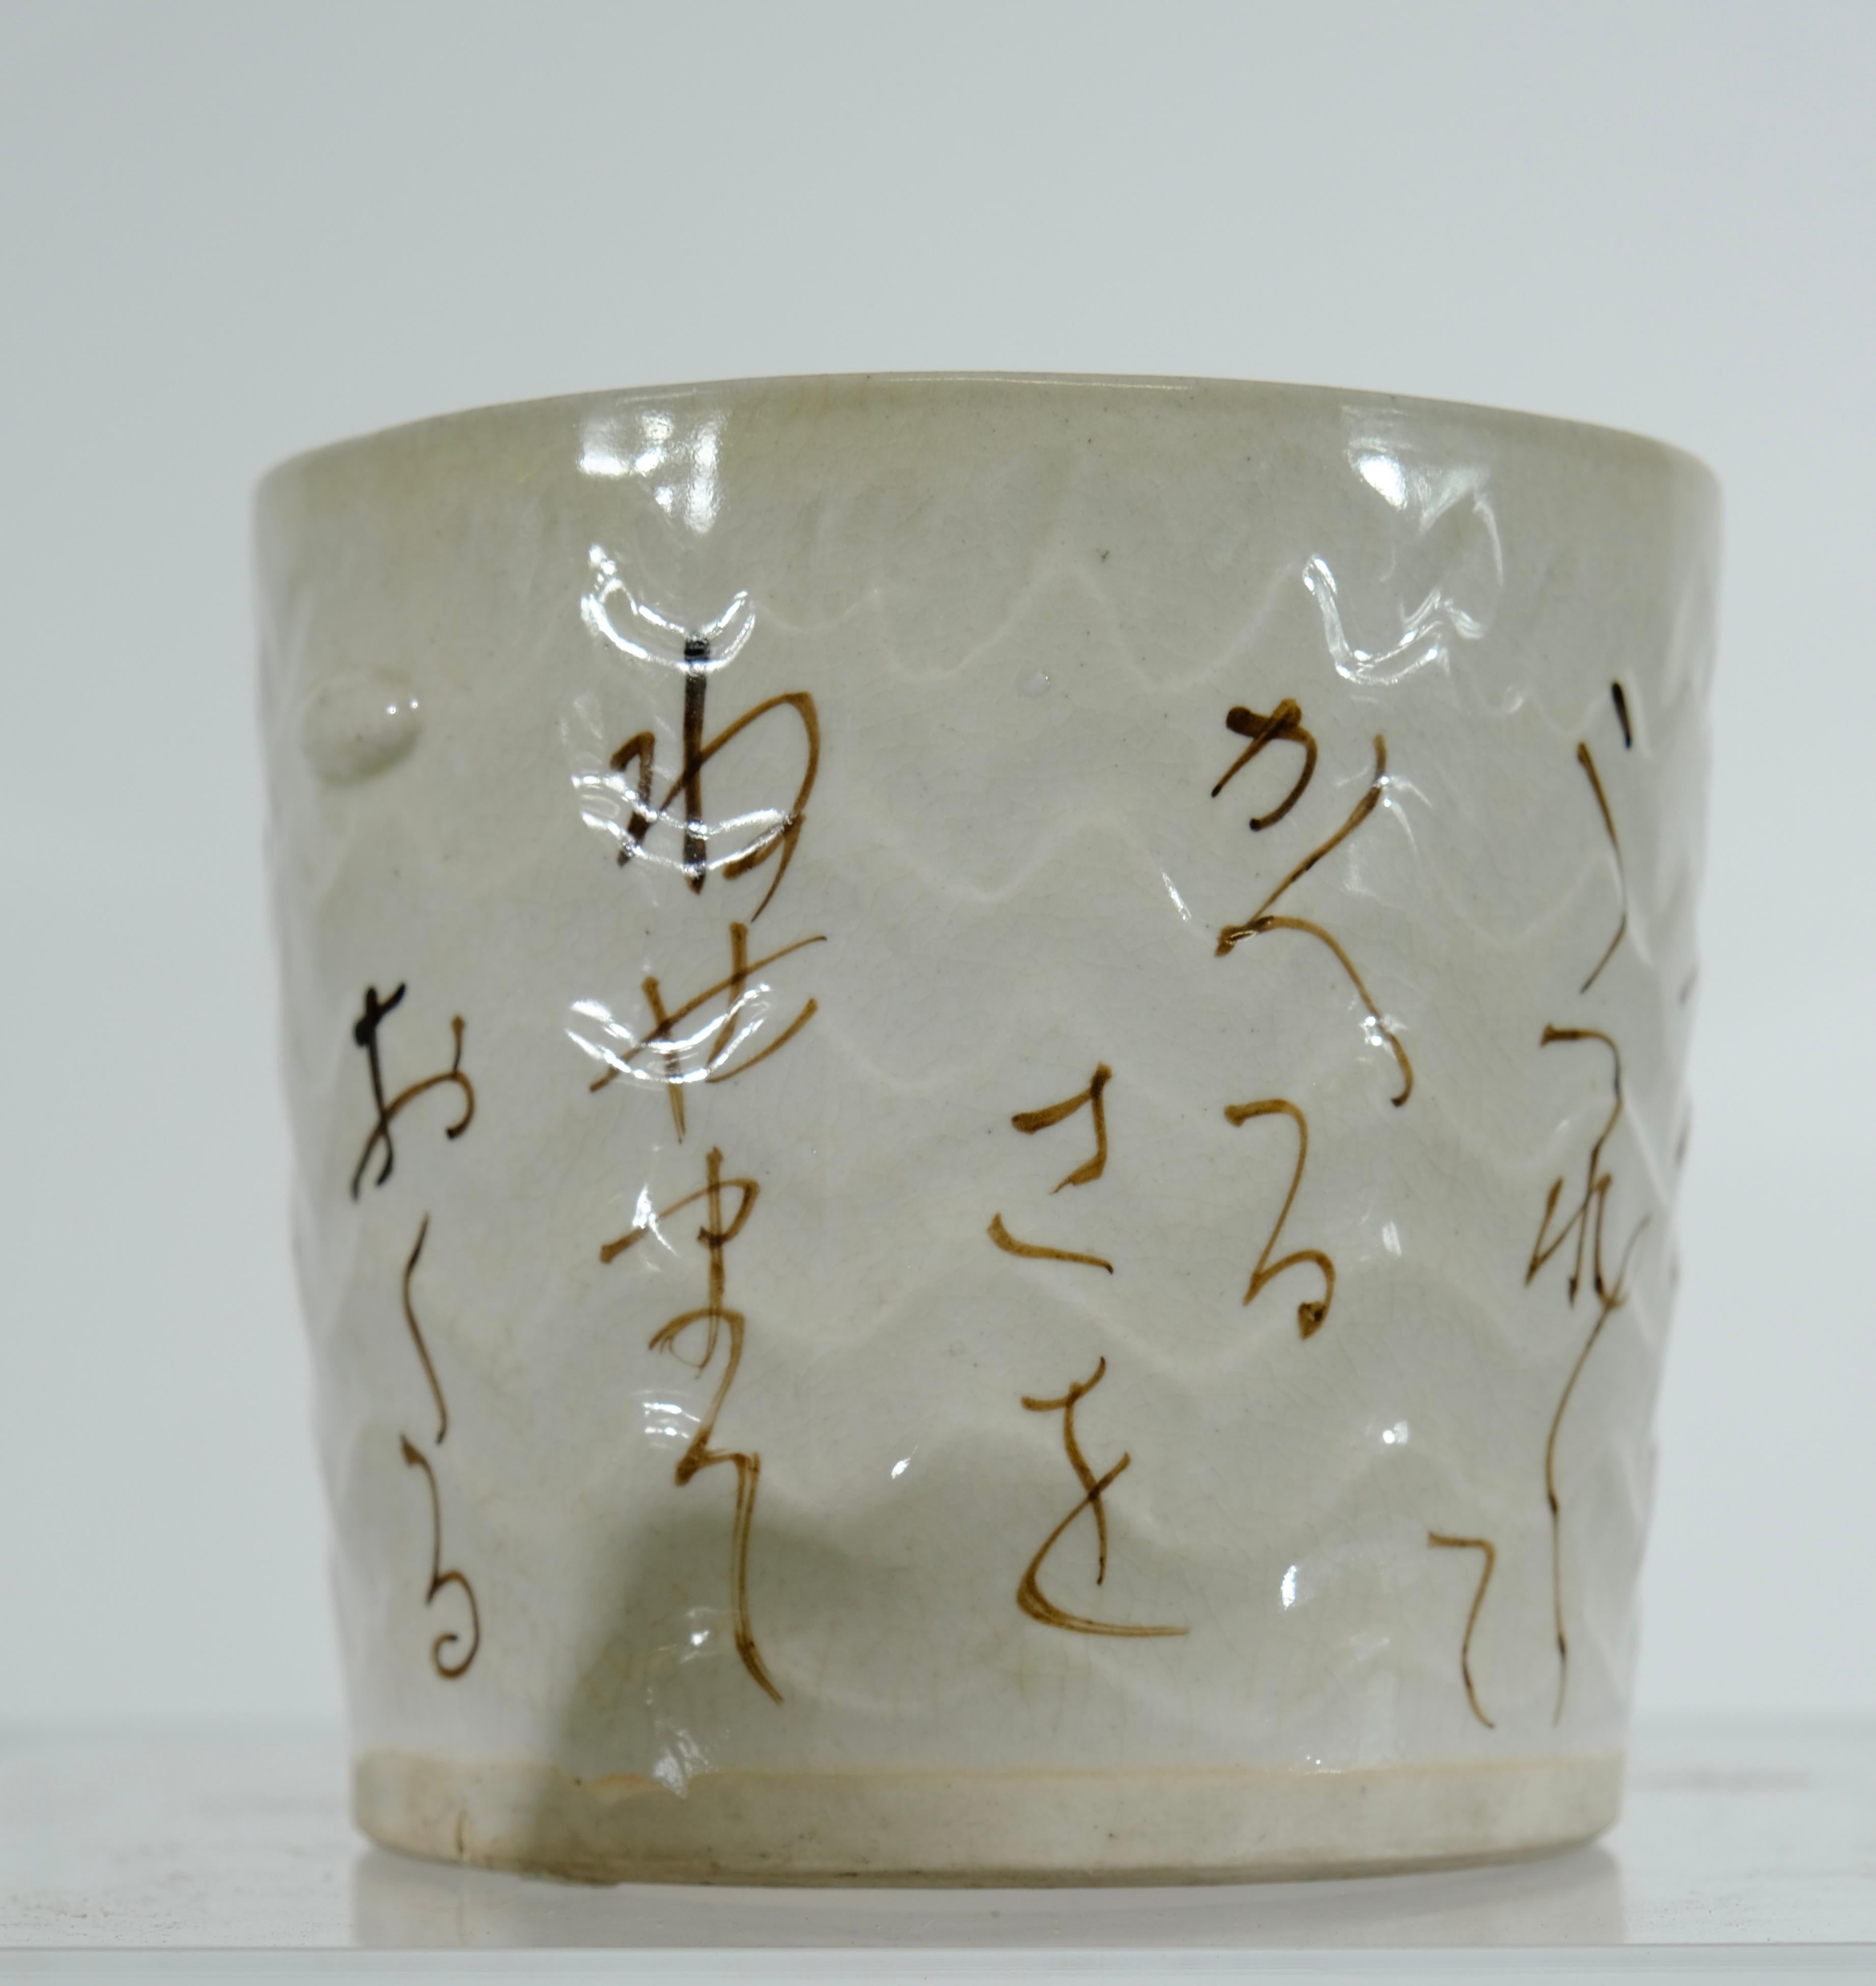 A charming Japanese graced bowl made of glazed burned clay. Beige in colour with poems written on it. it comes in its original wooden box.